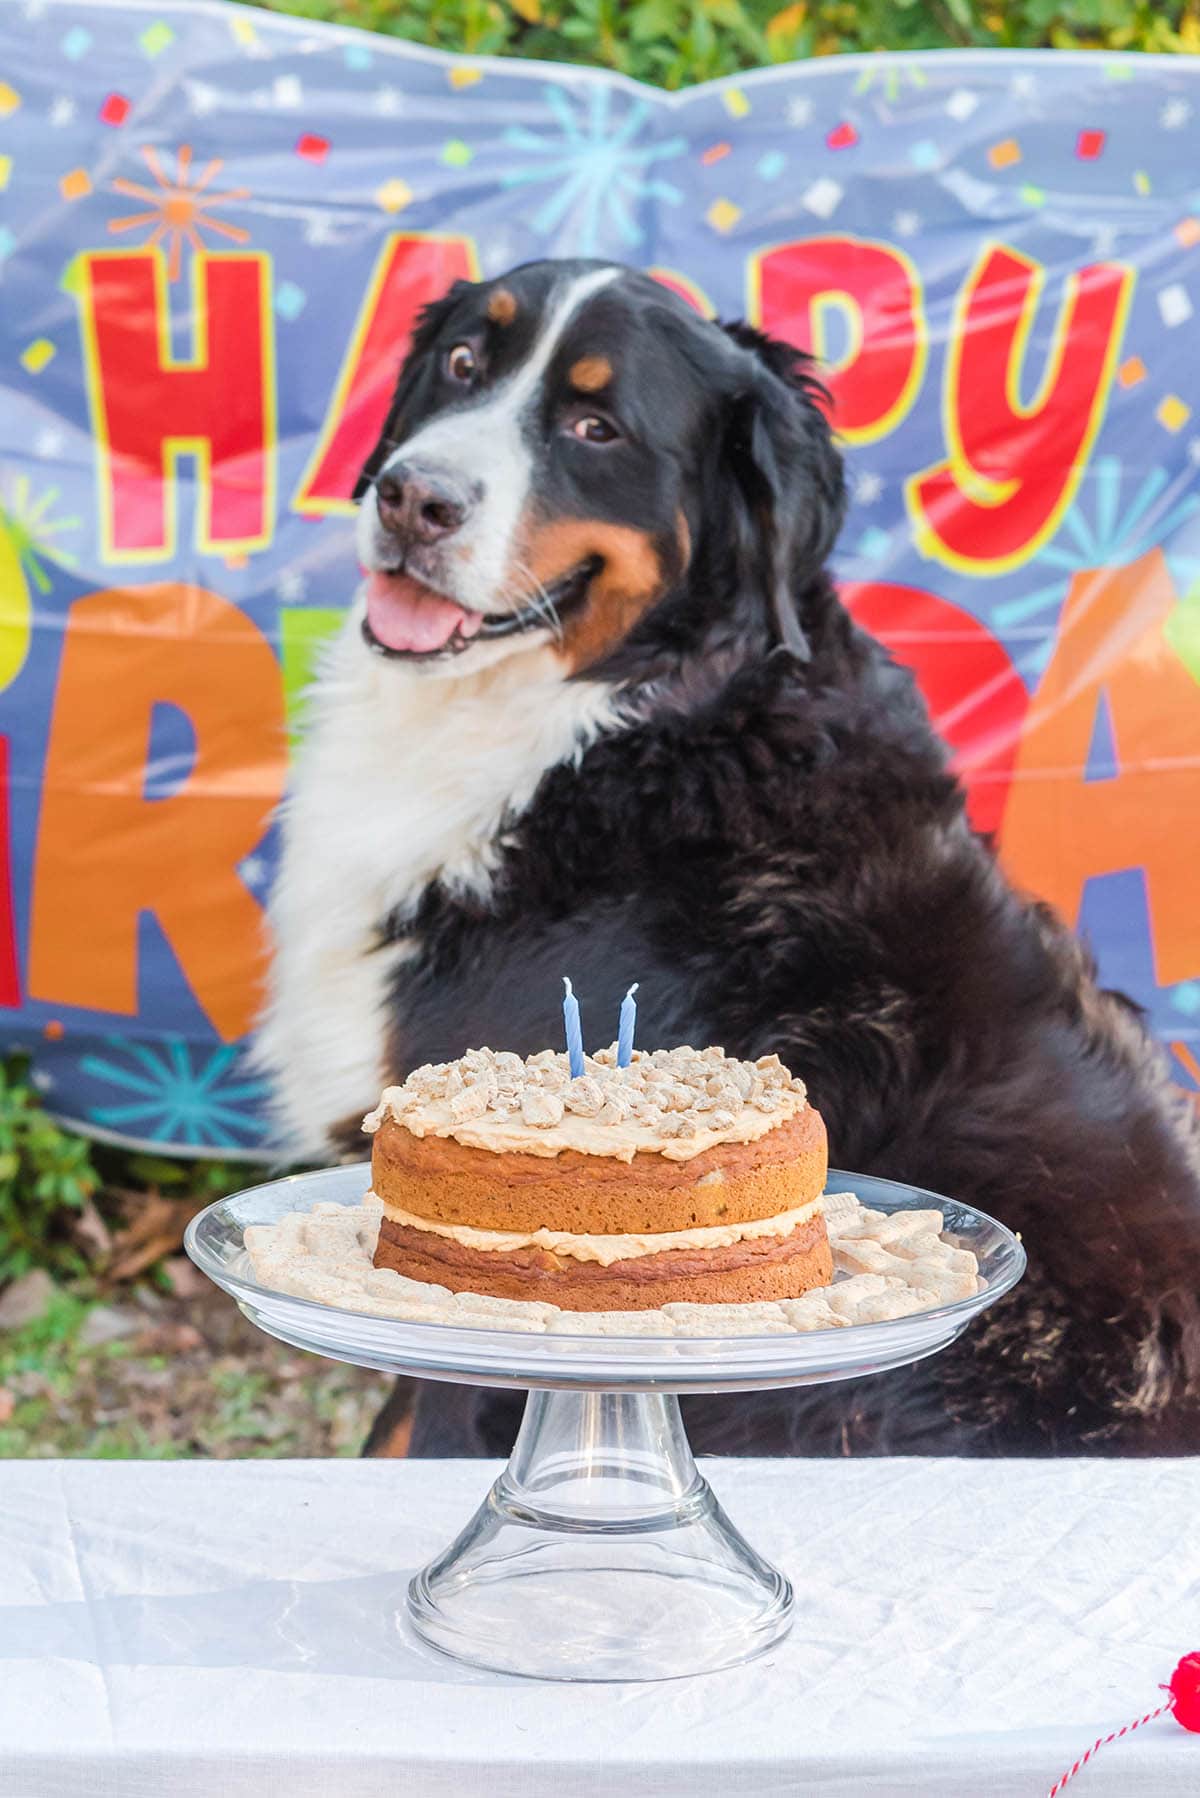 Doggie Birthday Cake with black doggy on the background